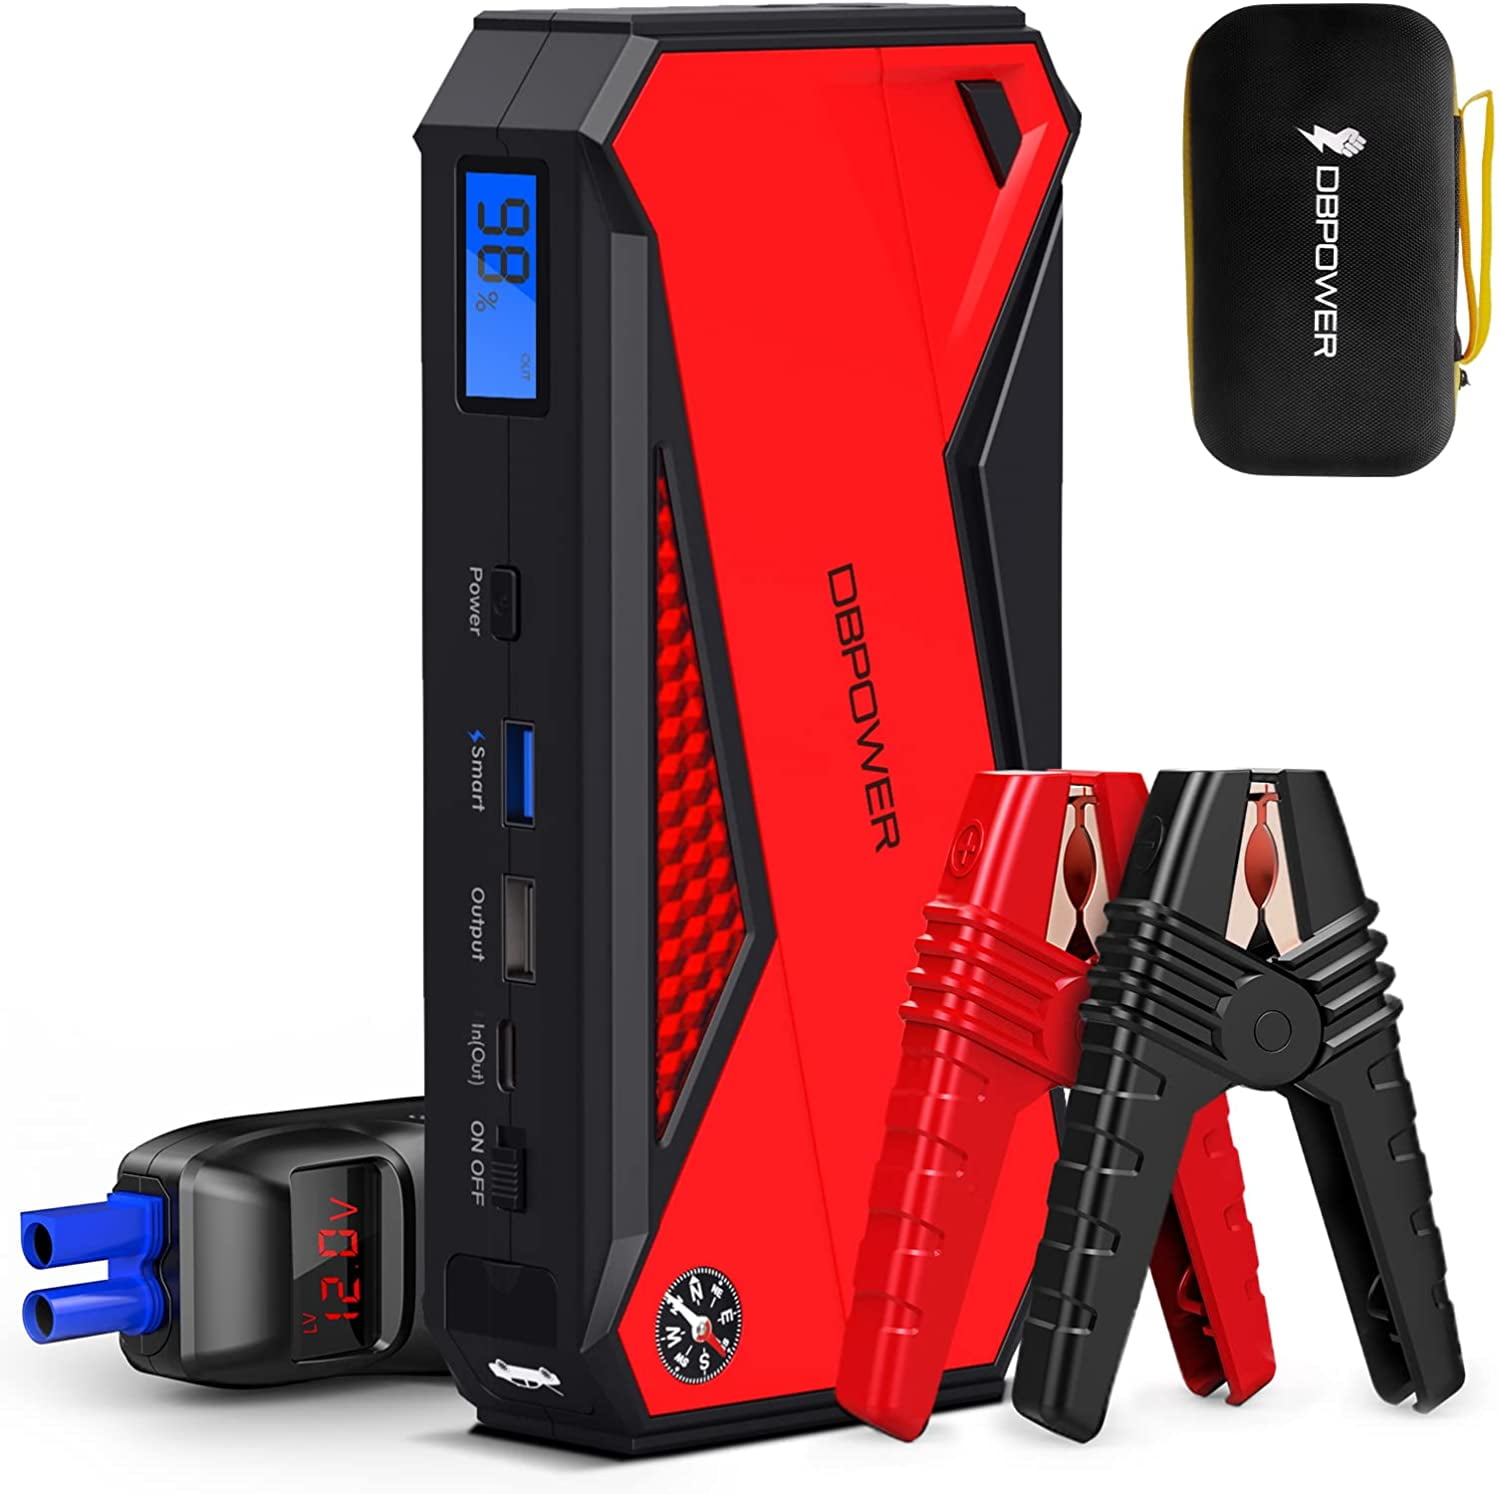 800 amp Peak 16000mAh Lithium Battery Booster Power Pack built in Flashlight Car Jump Starter up to 6L Gas & 3L Diesel Engine 